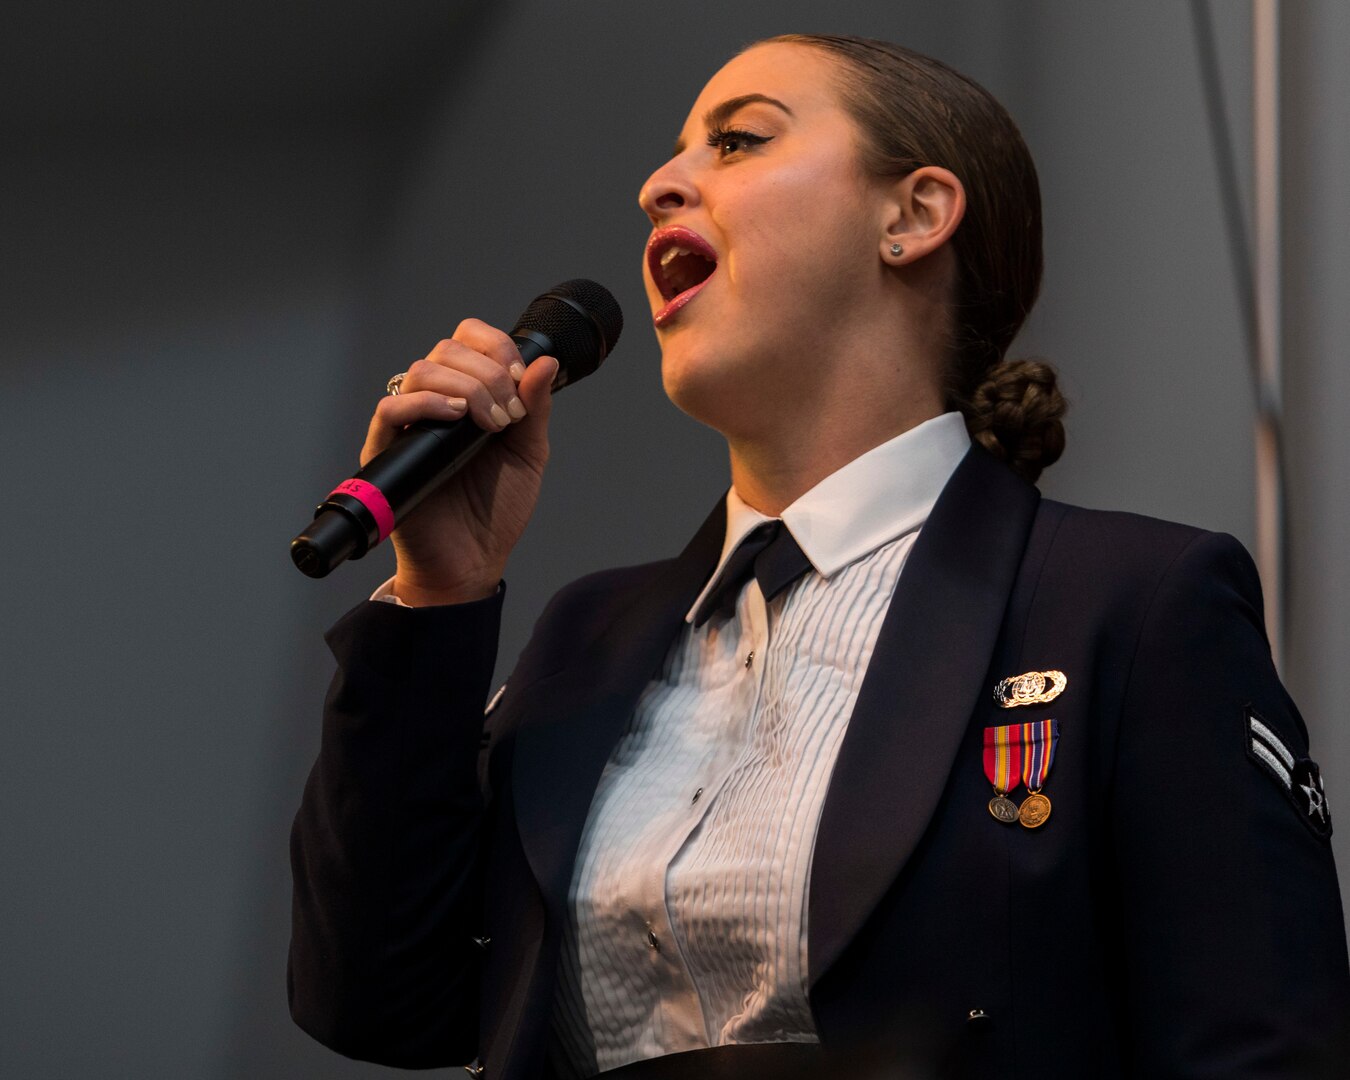 Vocalist Airmen 1st Class Michelle Rajotte, from Band of the West performs as part of Fiesta in Blue in San Antonio, Texas April 24, 2018. The act was dedicated to the 300th Anniversary of San Antonio and honors the city's military heritage. Since 1891, Fiesta has grown into an annual celebration that includes civic and military observances, exhibits, sports, music and food representing the spirit, diversity and vitality of San Antonio. (U.S. Air Force photo by Ismael Ortega / Released)